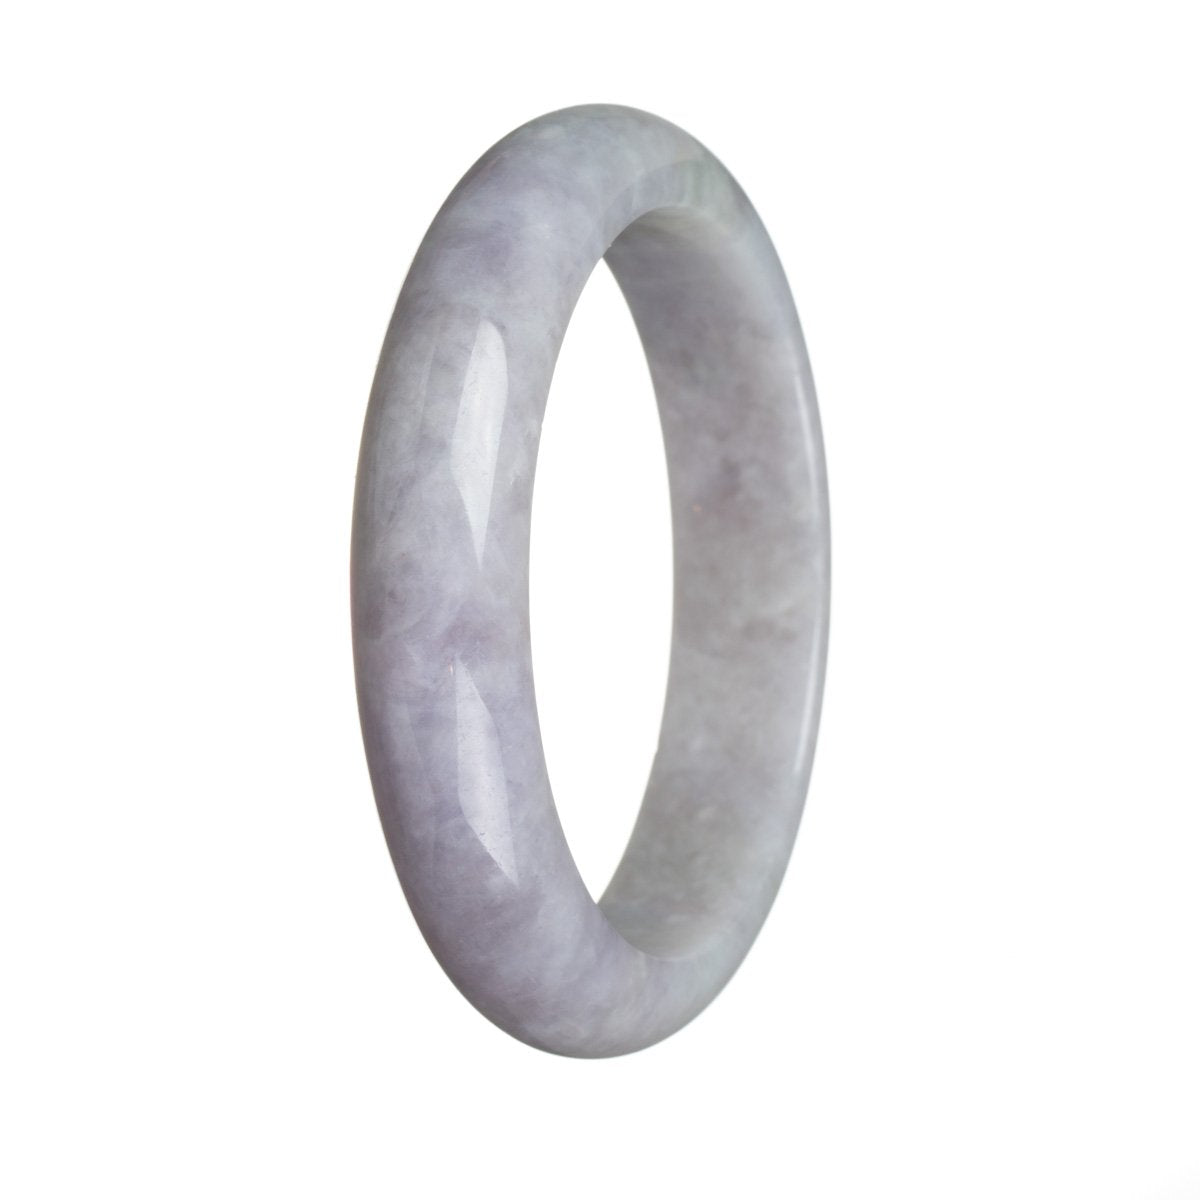 A beautiful lavender and green Burma Jade bangle with a half moon shape, measuring 61mm in size. A genuine Type A jade jewelry piece by MAYS™.